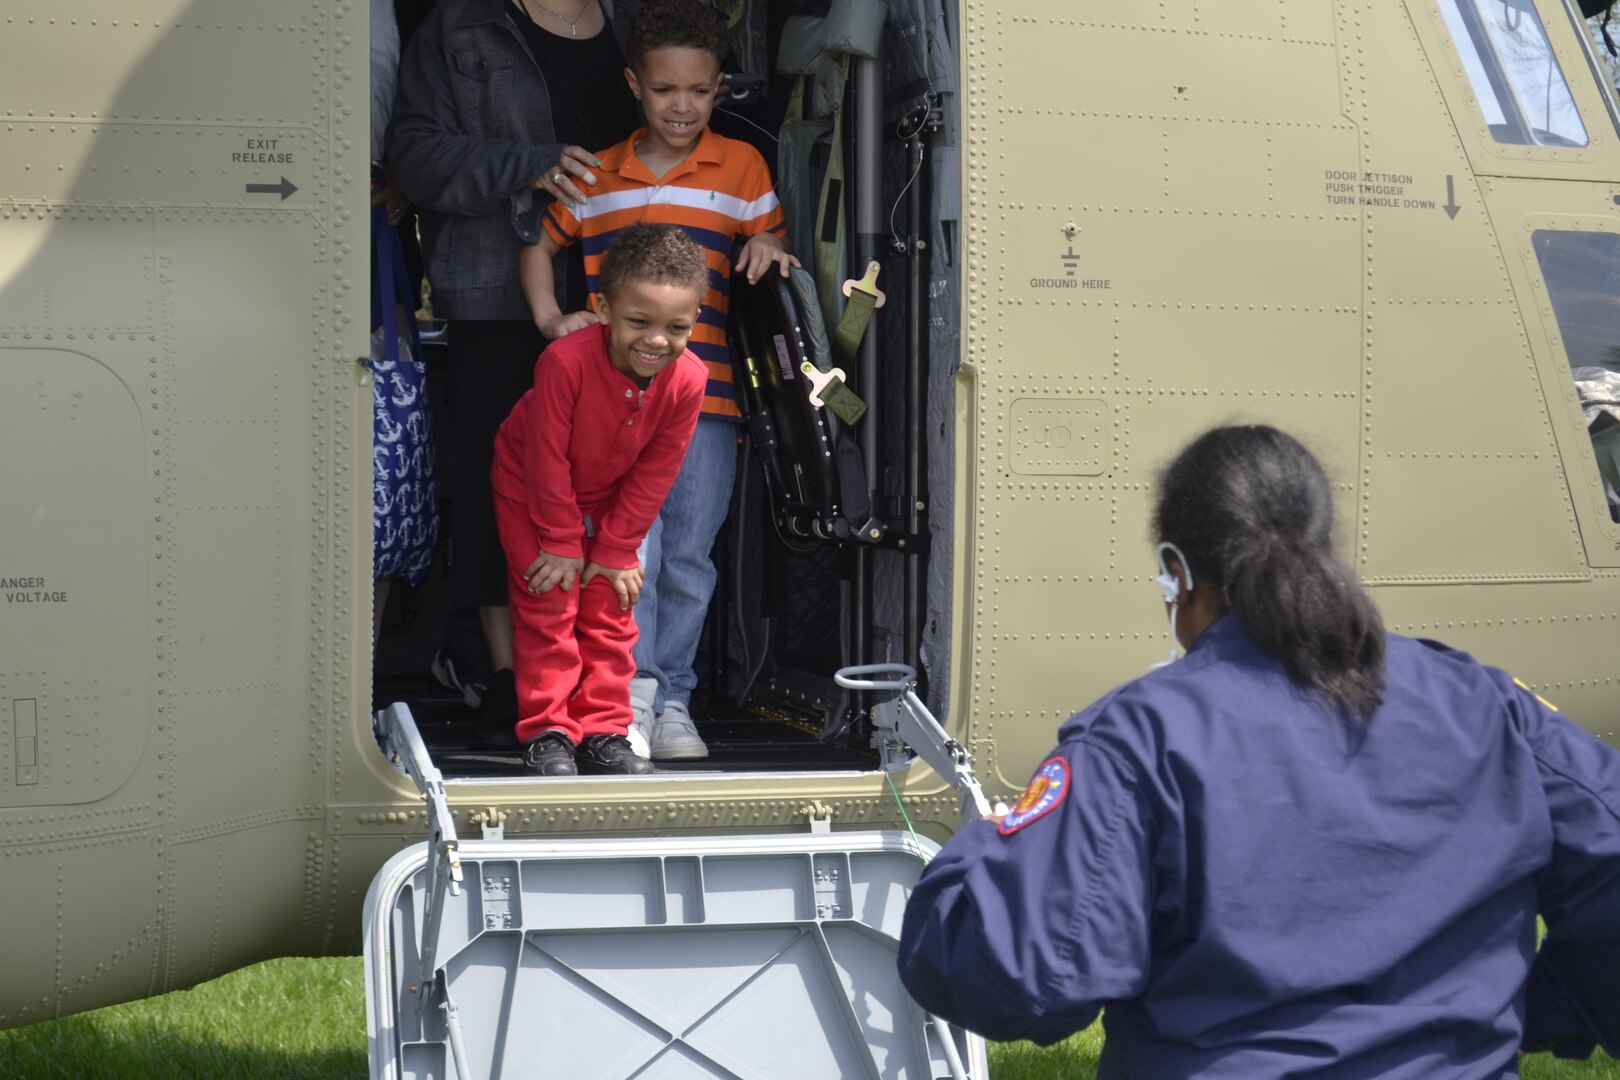 Elijah, 4, (in red) and Robert, 6, prepare to exit a Chinook CH-47 on display at Naval Support Activity Philadelphia during Take Our Daughters and Sons to Work Day April 27. More than 440 children participated in interactive activities to learn more about the military and missions of DLA Troop Support and NAVSUP Weapon Systems Support.